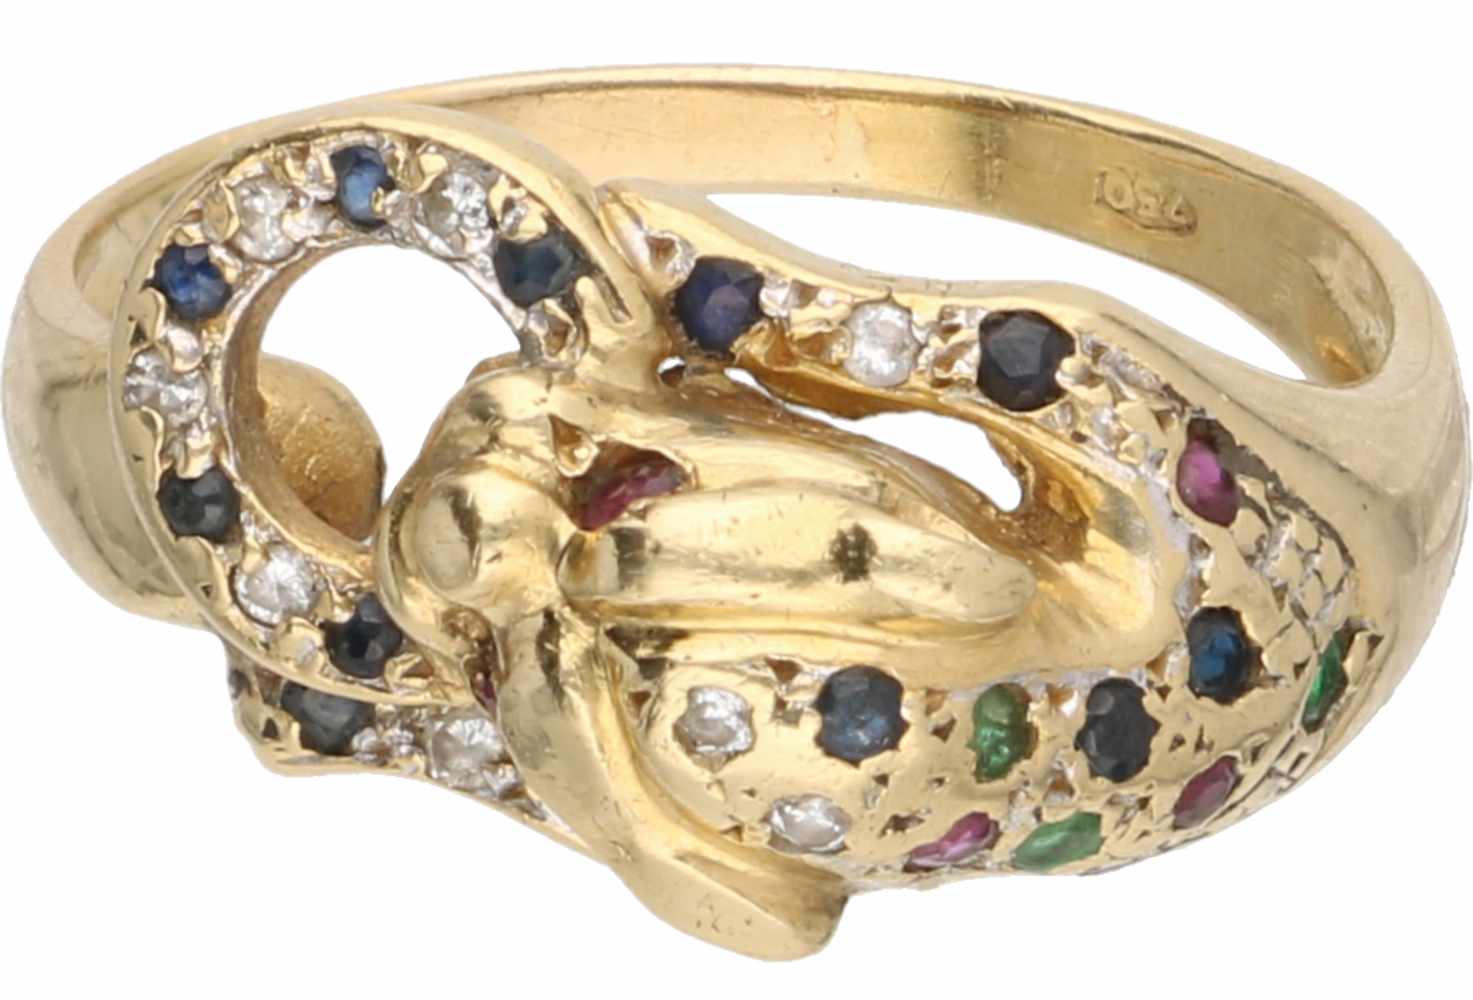 Ring yellow gold, ca. 0.04 carat diamond, sapphire, ruby and emerald - 18 ct. - Image 2 of 3